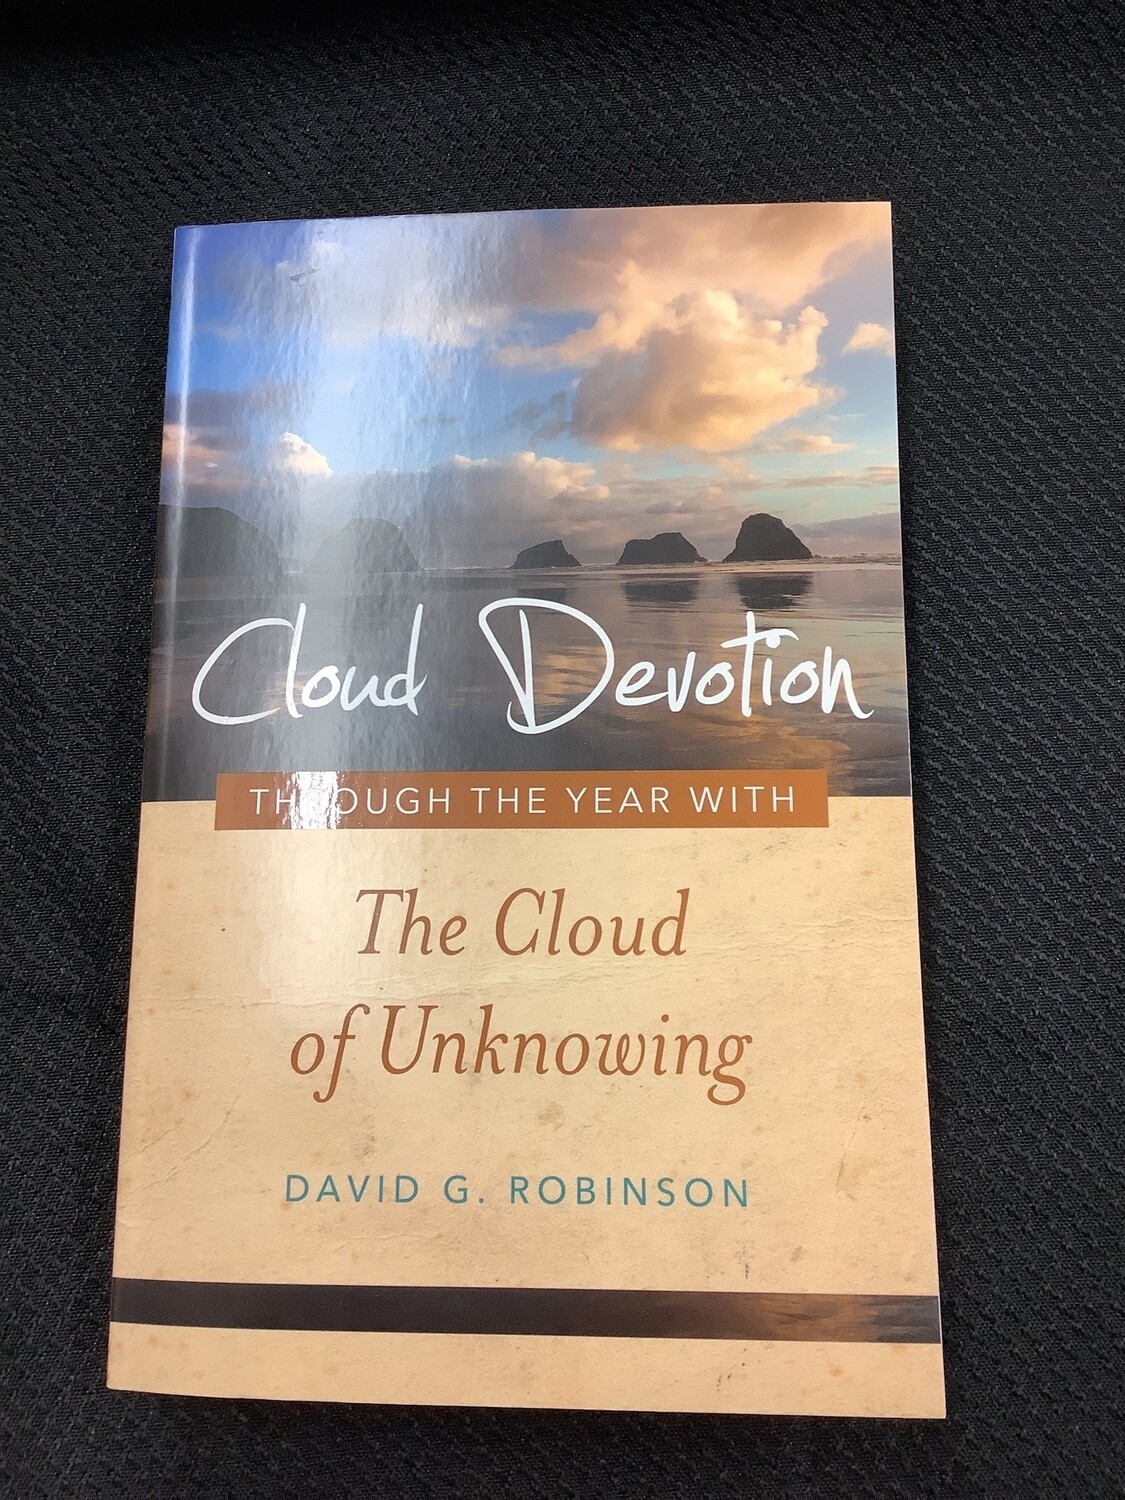 Clouds Devotion Through the Year with The Cloud of Unknowing - David G. Robinson